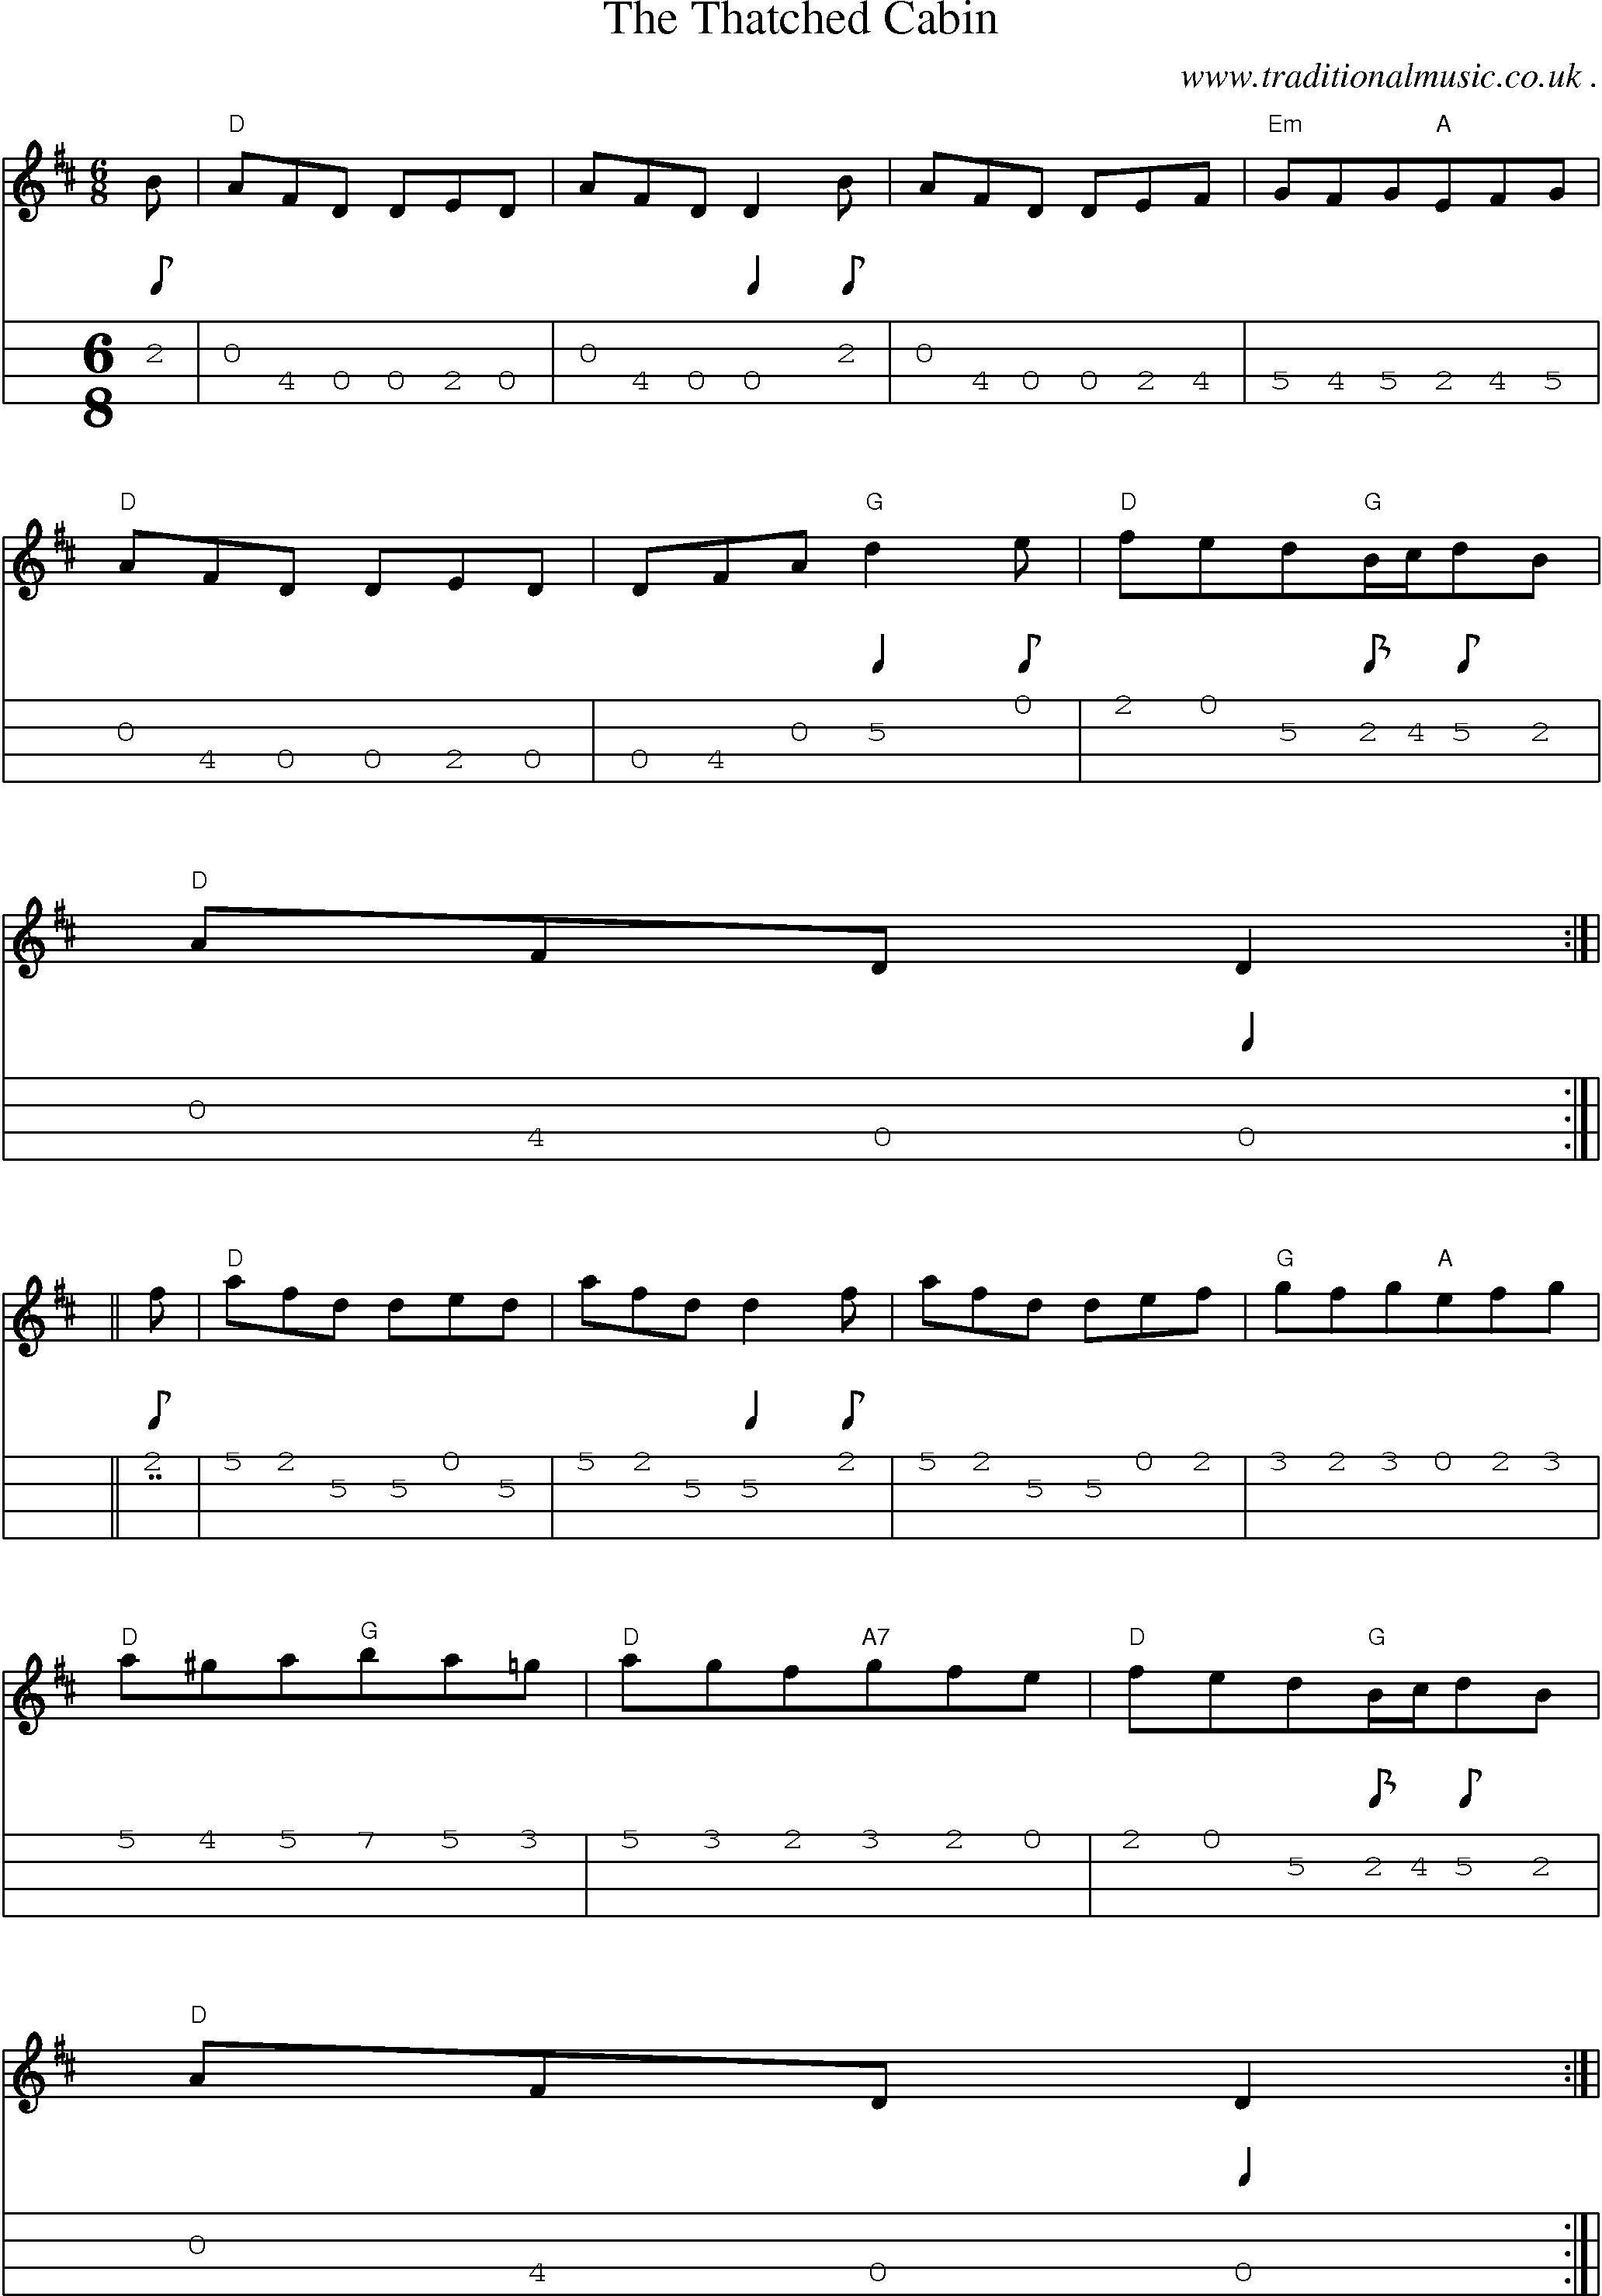 Sheet-Music and Mandolin Tabs for The Thatched Cabin